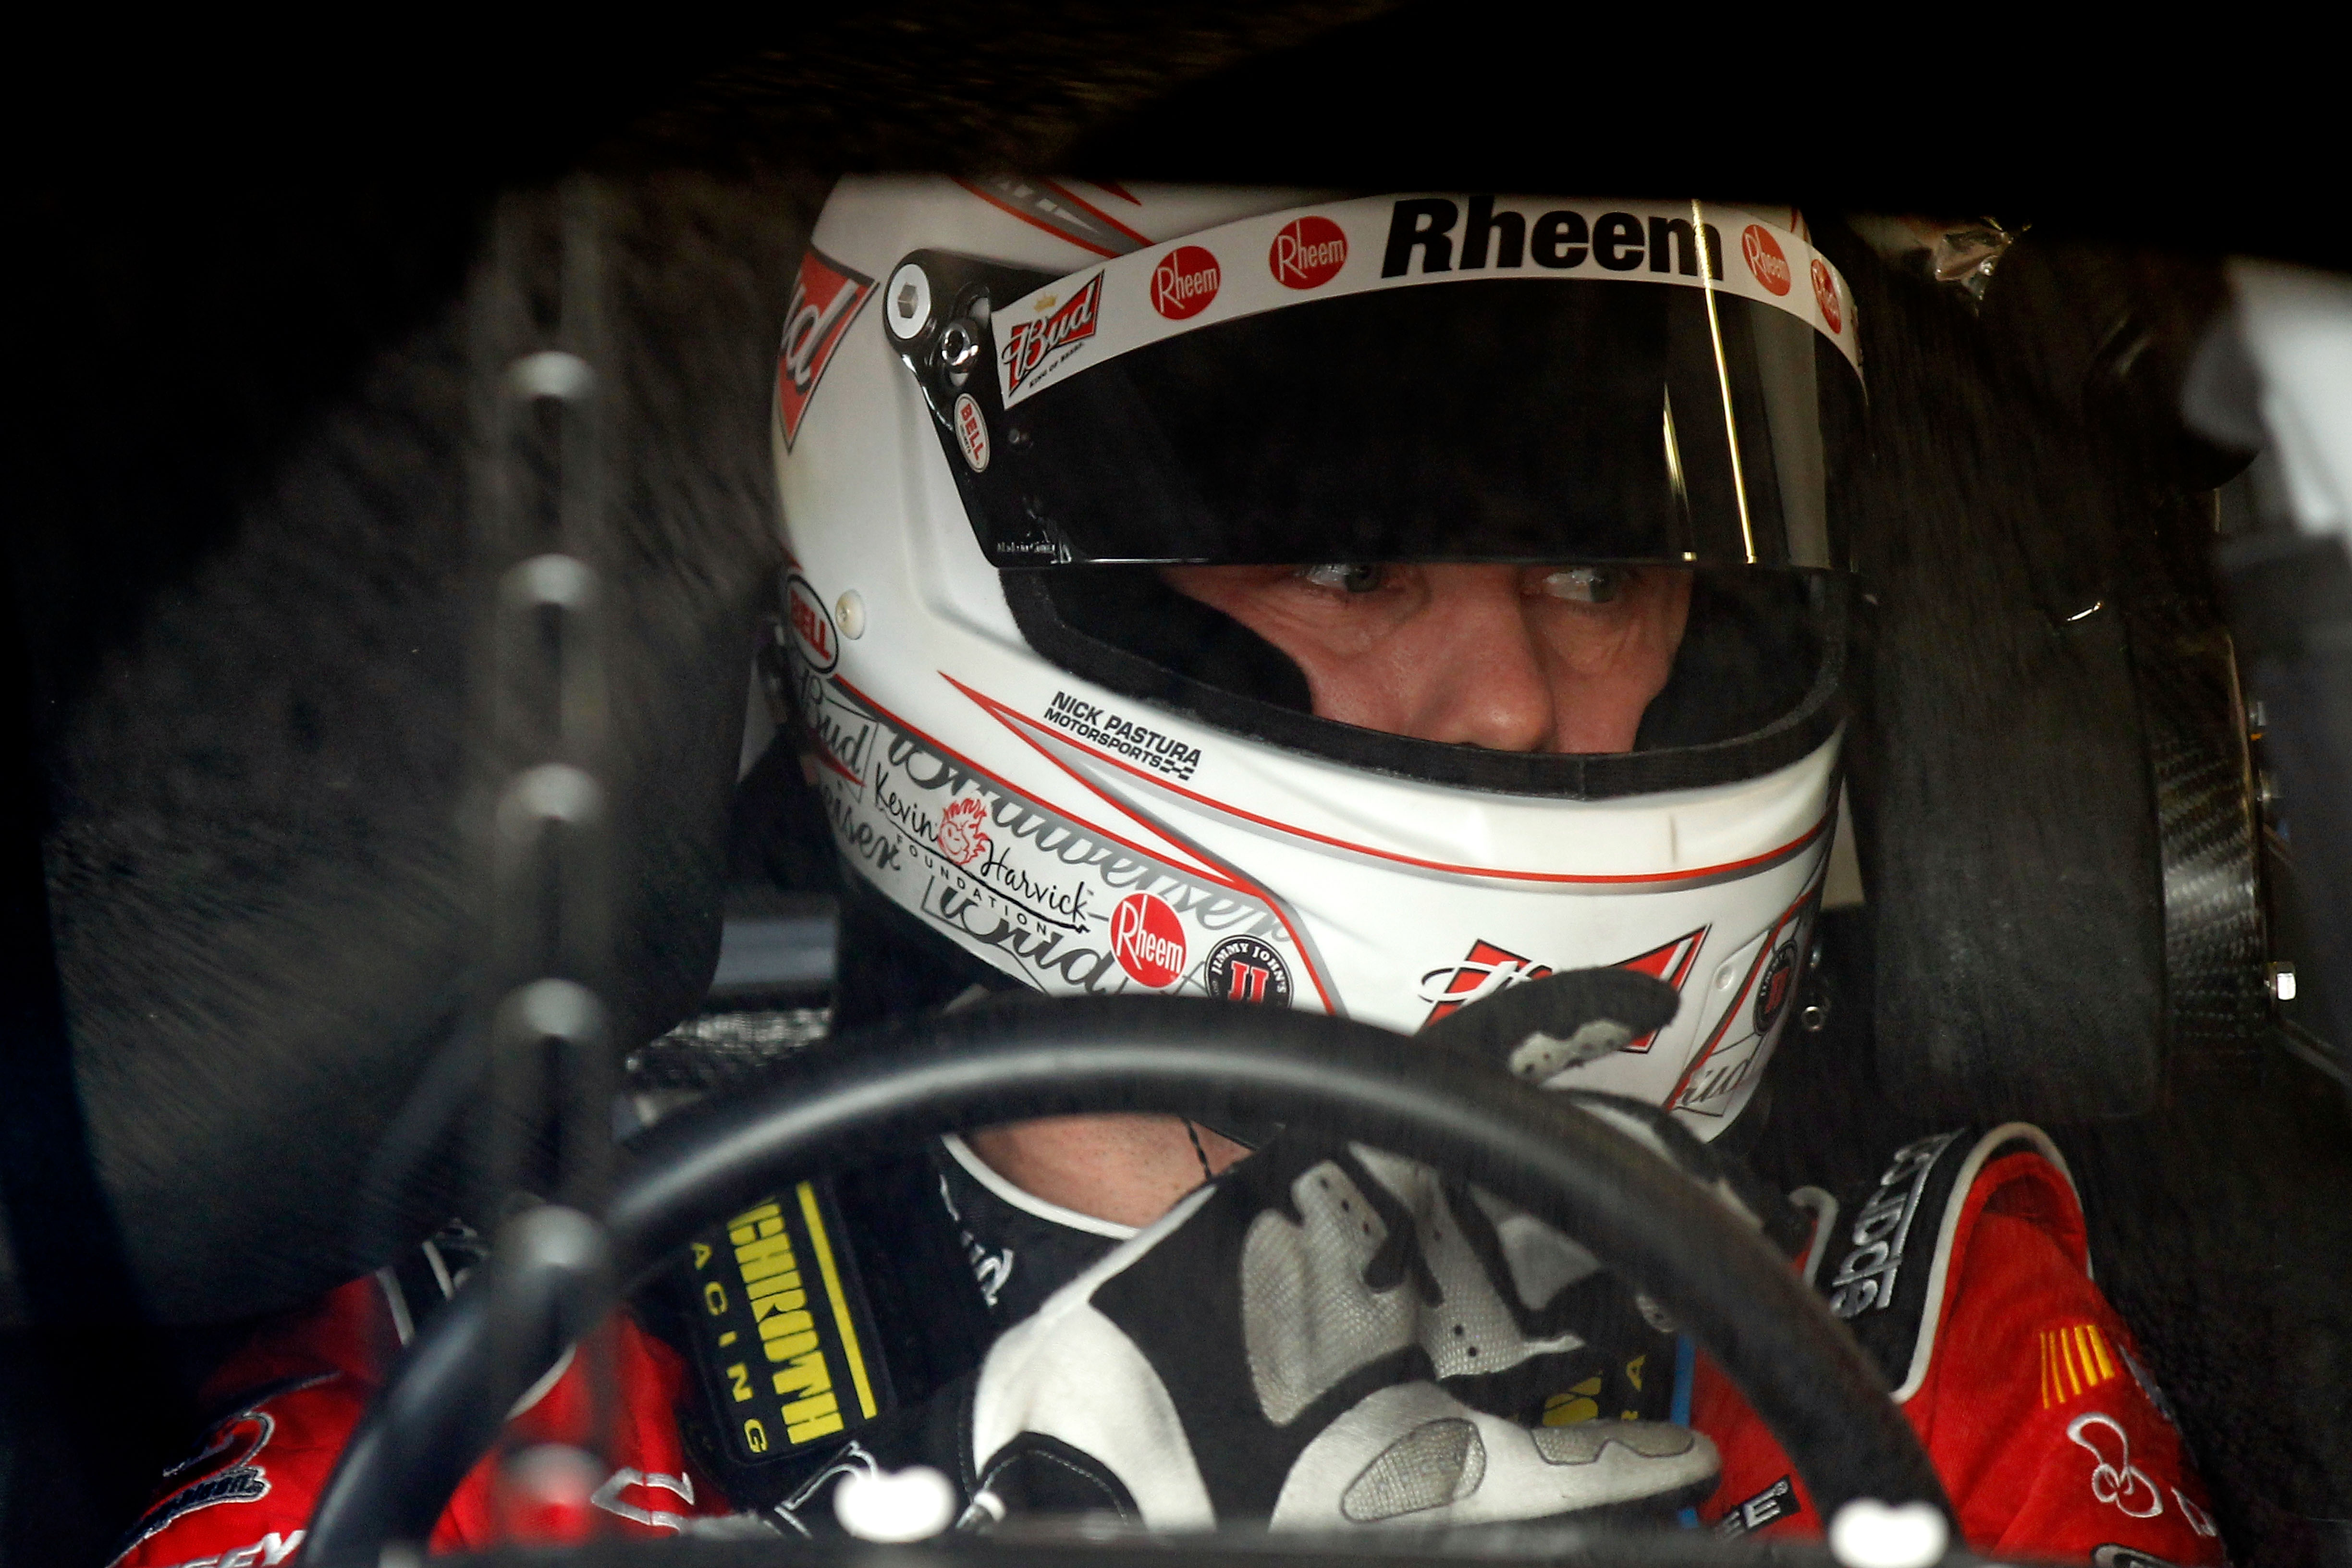 DAYTONA BEACH, FL - FEBRUARY 16:  Kevin Harvick, driver of the #29 Budweiser Chevrolet, sits in his car during practice for the NASCAR Sprint Cup Series Daytona 500 at Daytona International Speedway on February 16, 2011 in Daytona Beach, Florida.  (Photo